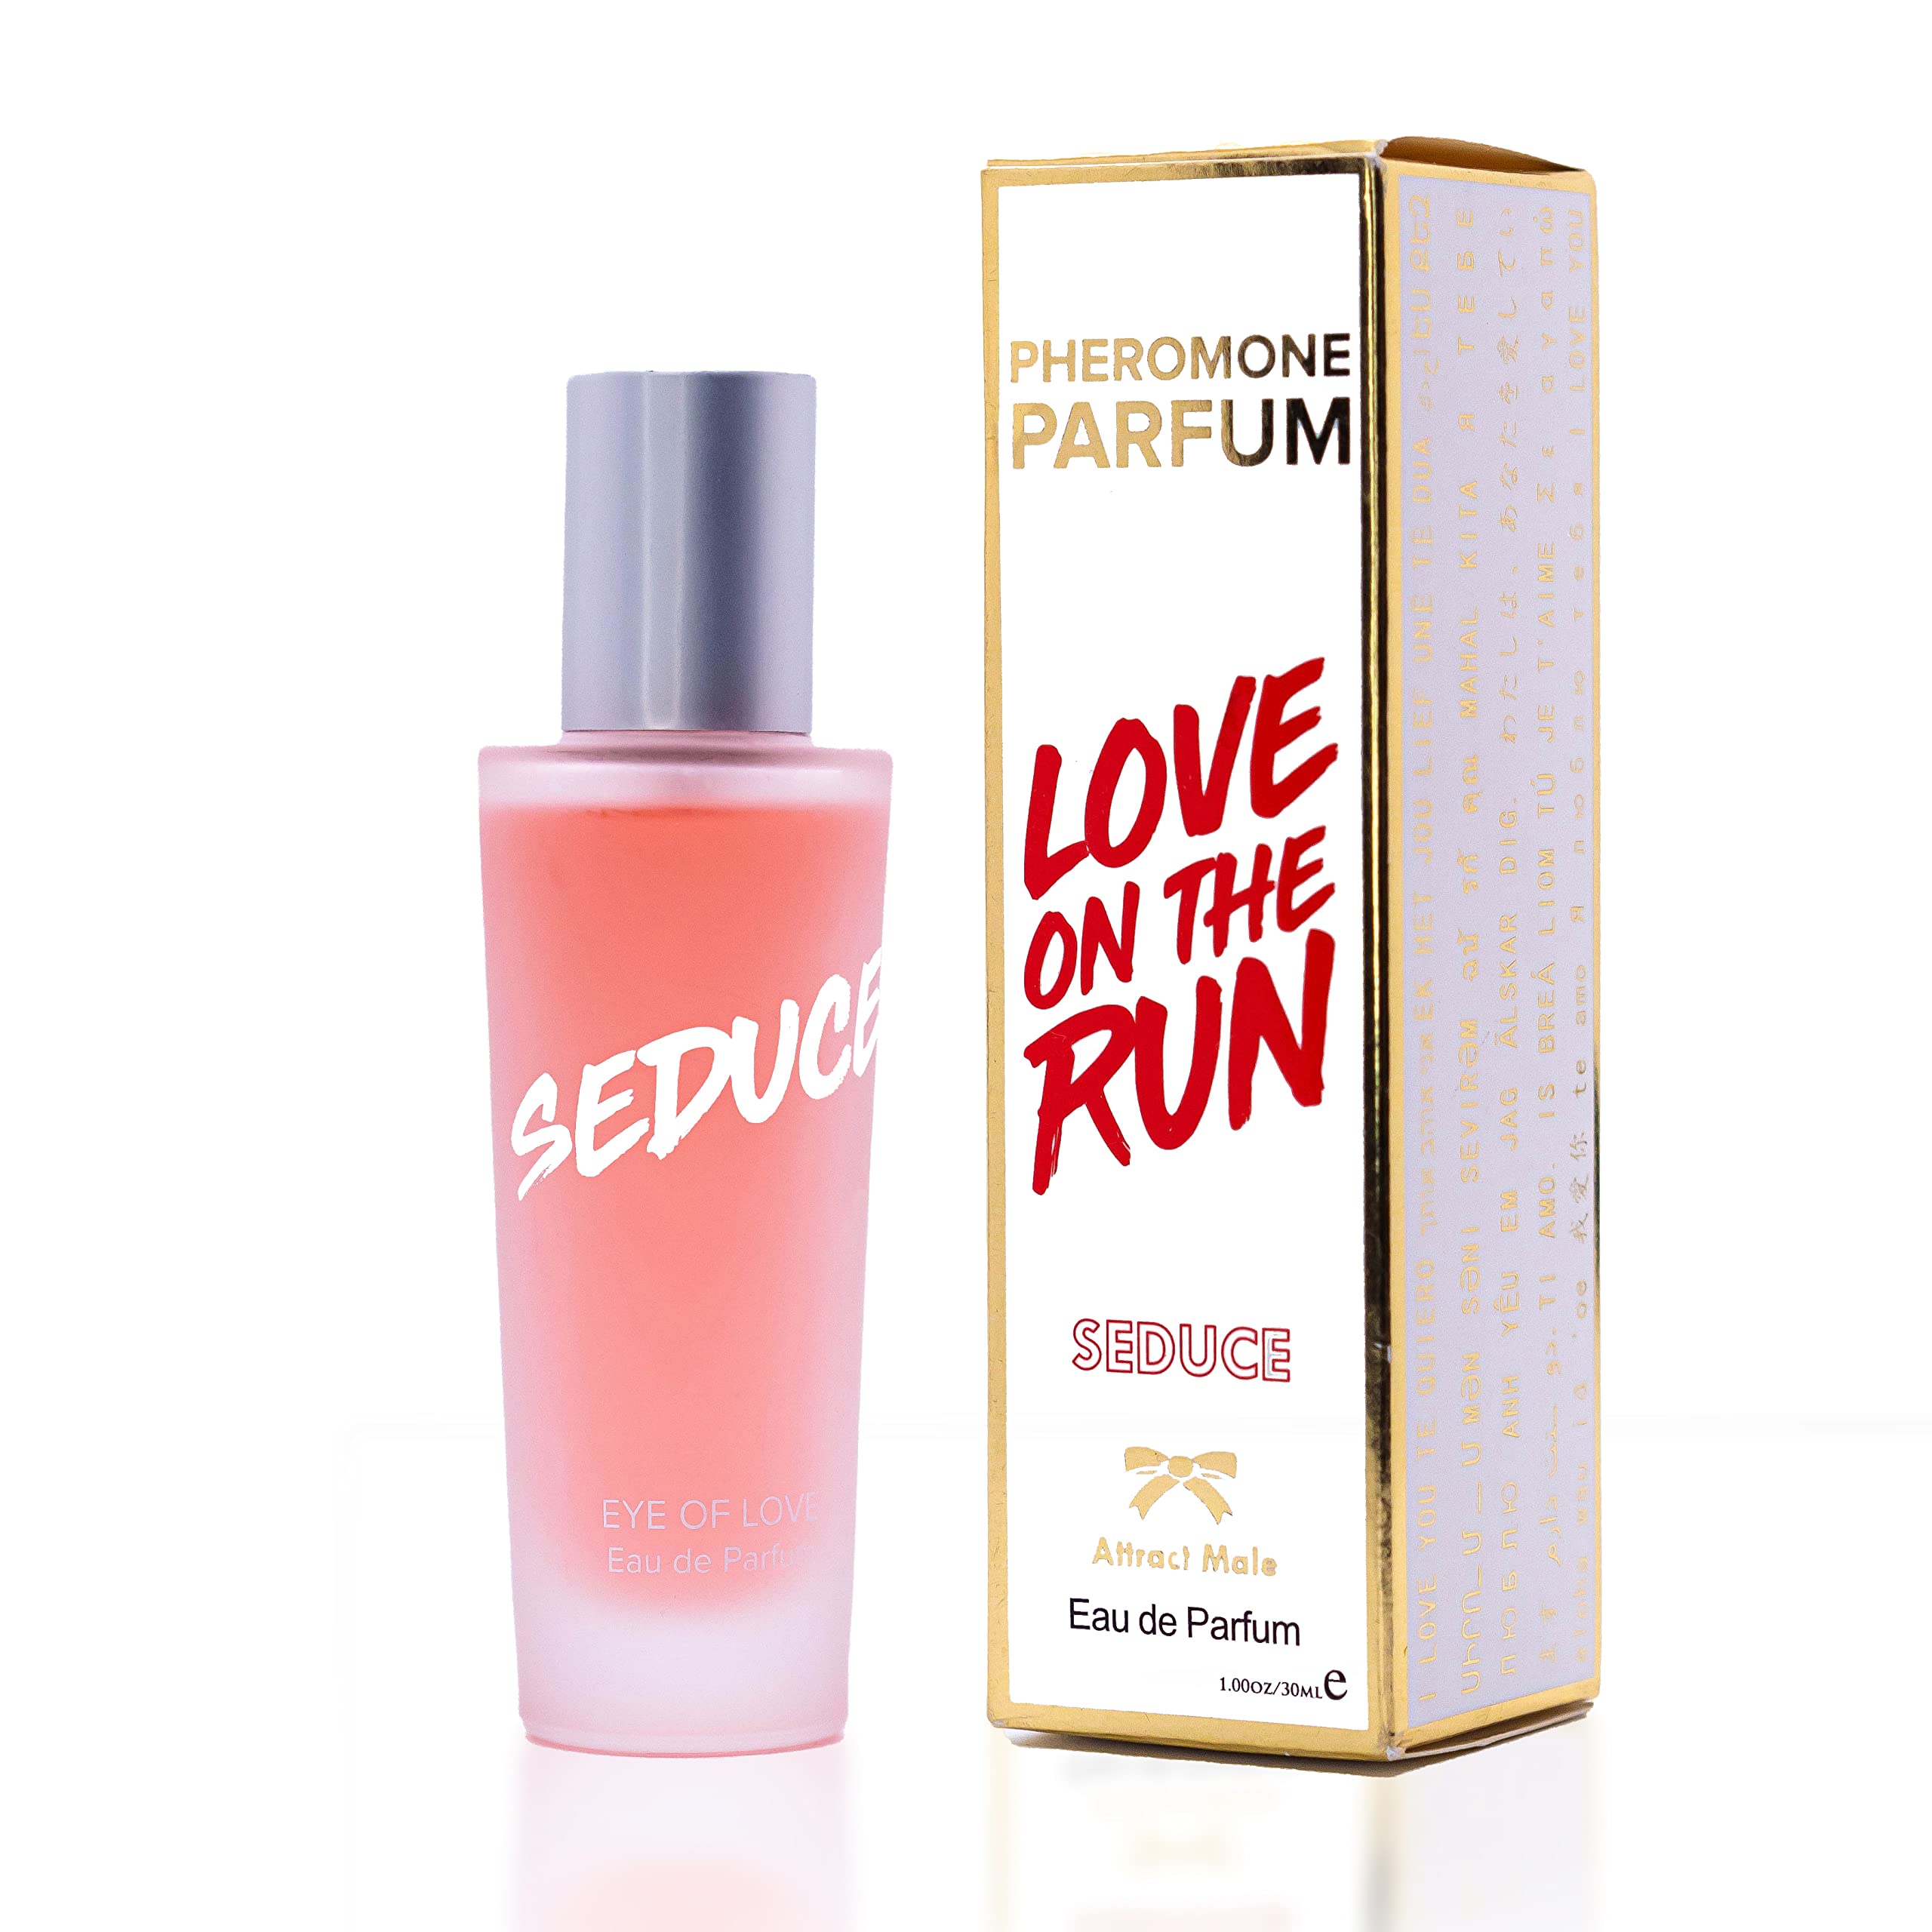 Eye Love Seduxe 30ml Pheromone Parfum- Experience the magic of sweet and seductive notes that celebrate femininity- Embrace the magic of Pheromones and live life to the fullest wherever you go.